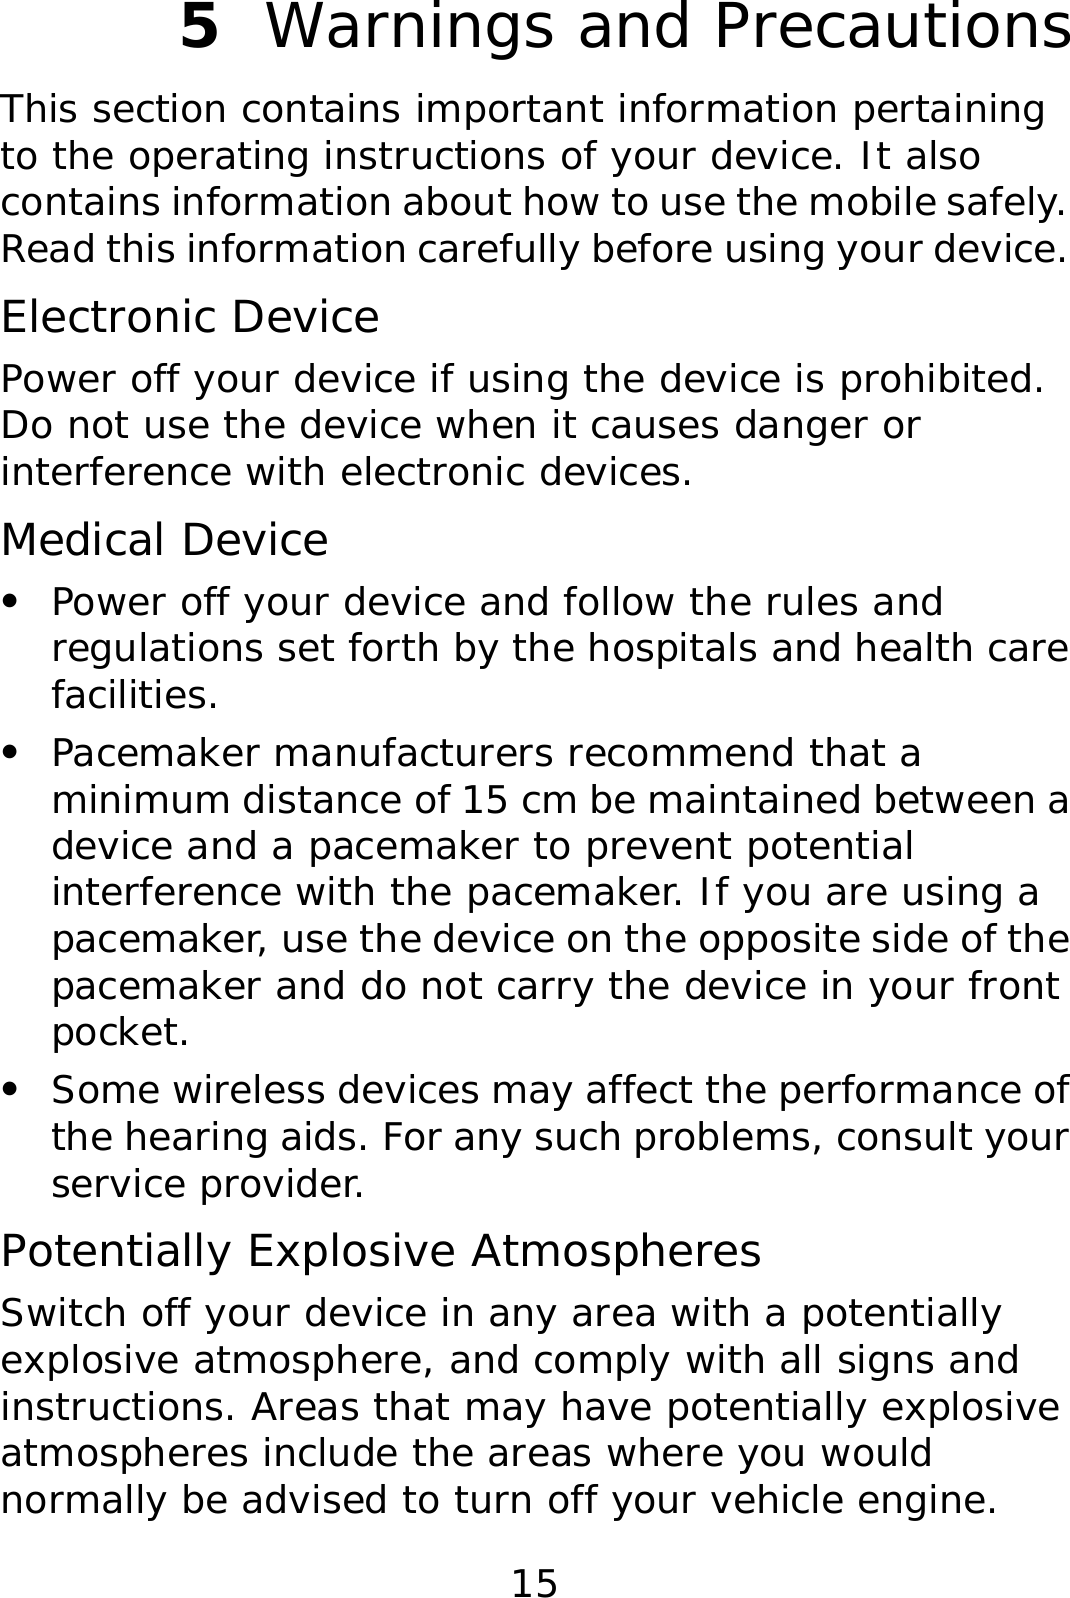 15 5  Warnings and Precautions This section contains important information pertaining to the operating instructions of your device. It also contains information about how to use the mobile safely. Read this information carefully before using your device. Electronic Device Power off your device if using the device is prohibited. Do not use the device when it causes danger or interference with electronic devices. Medical Device z Power off your device and follow the rules and regulations set forth by the hospitals and health care facilities. z Pacemaker manufacturers recommend that a minimum distance of 15 cm be maintained between a device and a pacemaker to prevent potential interference with the pacemaker. If you are using a pacemaker, use the device on the opposite side of the pacemaker and do not carry the device in your front pocket. z Some wireless devices may affect the performance of the hearing aids. For any such problems, consult your service provider. Potentially Explosive Atmospheres Switch off your device in any area with a potentially explosive atmosphere, and comply with all signs and instructions. Areas that may have potentially explosive atmospheres include the areas where you would normally be advised to turn off your vehicle engine. 